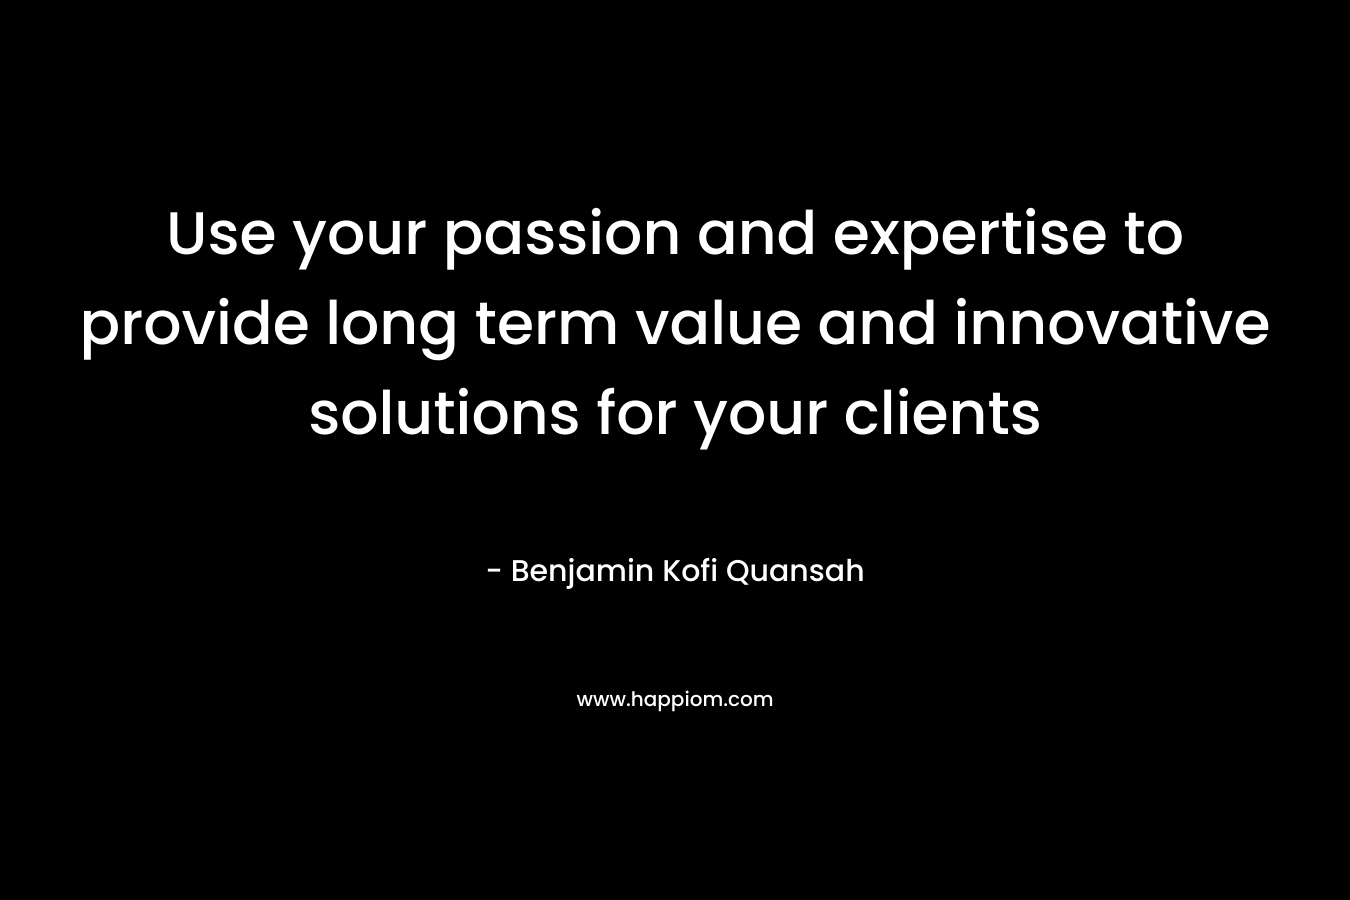 Use your passion and expertise to provide long term value and innovative solutions for your clients